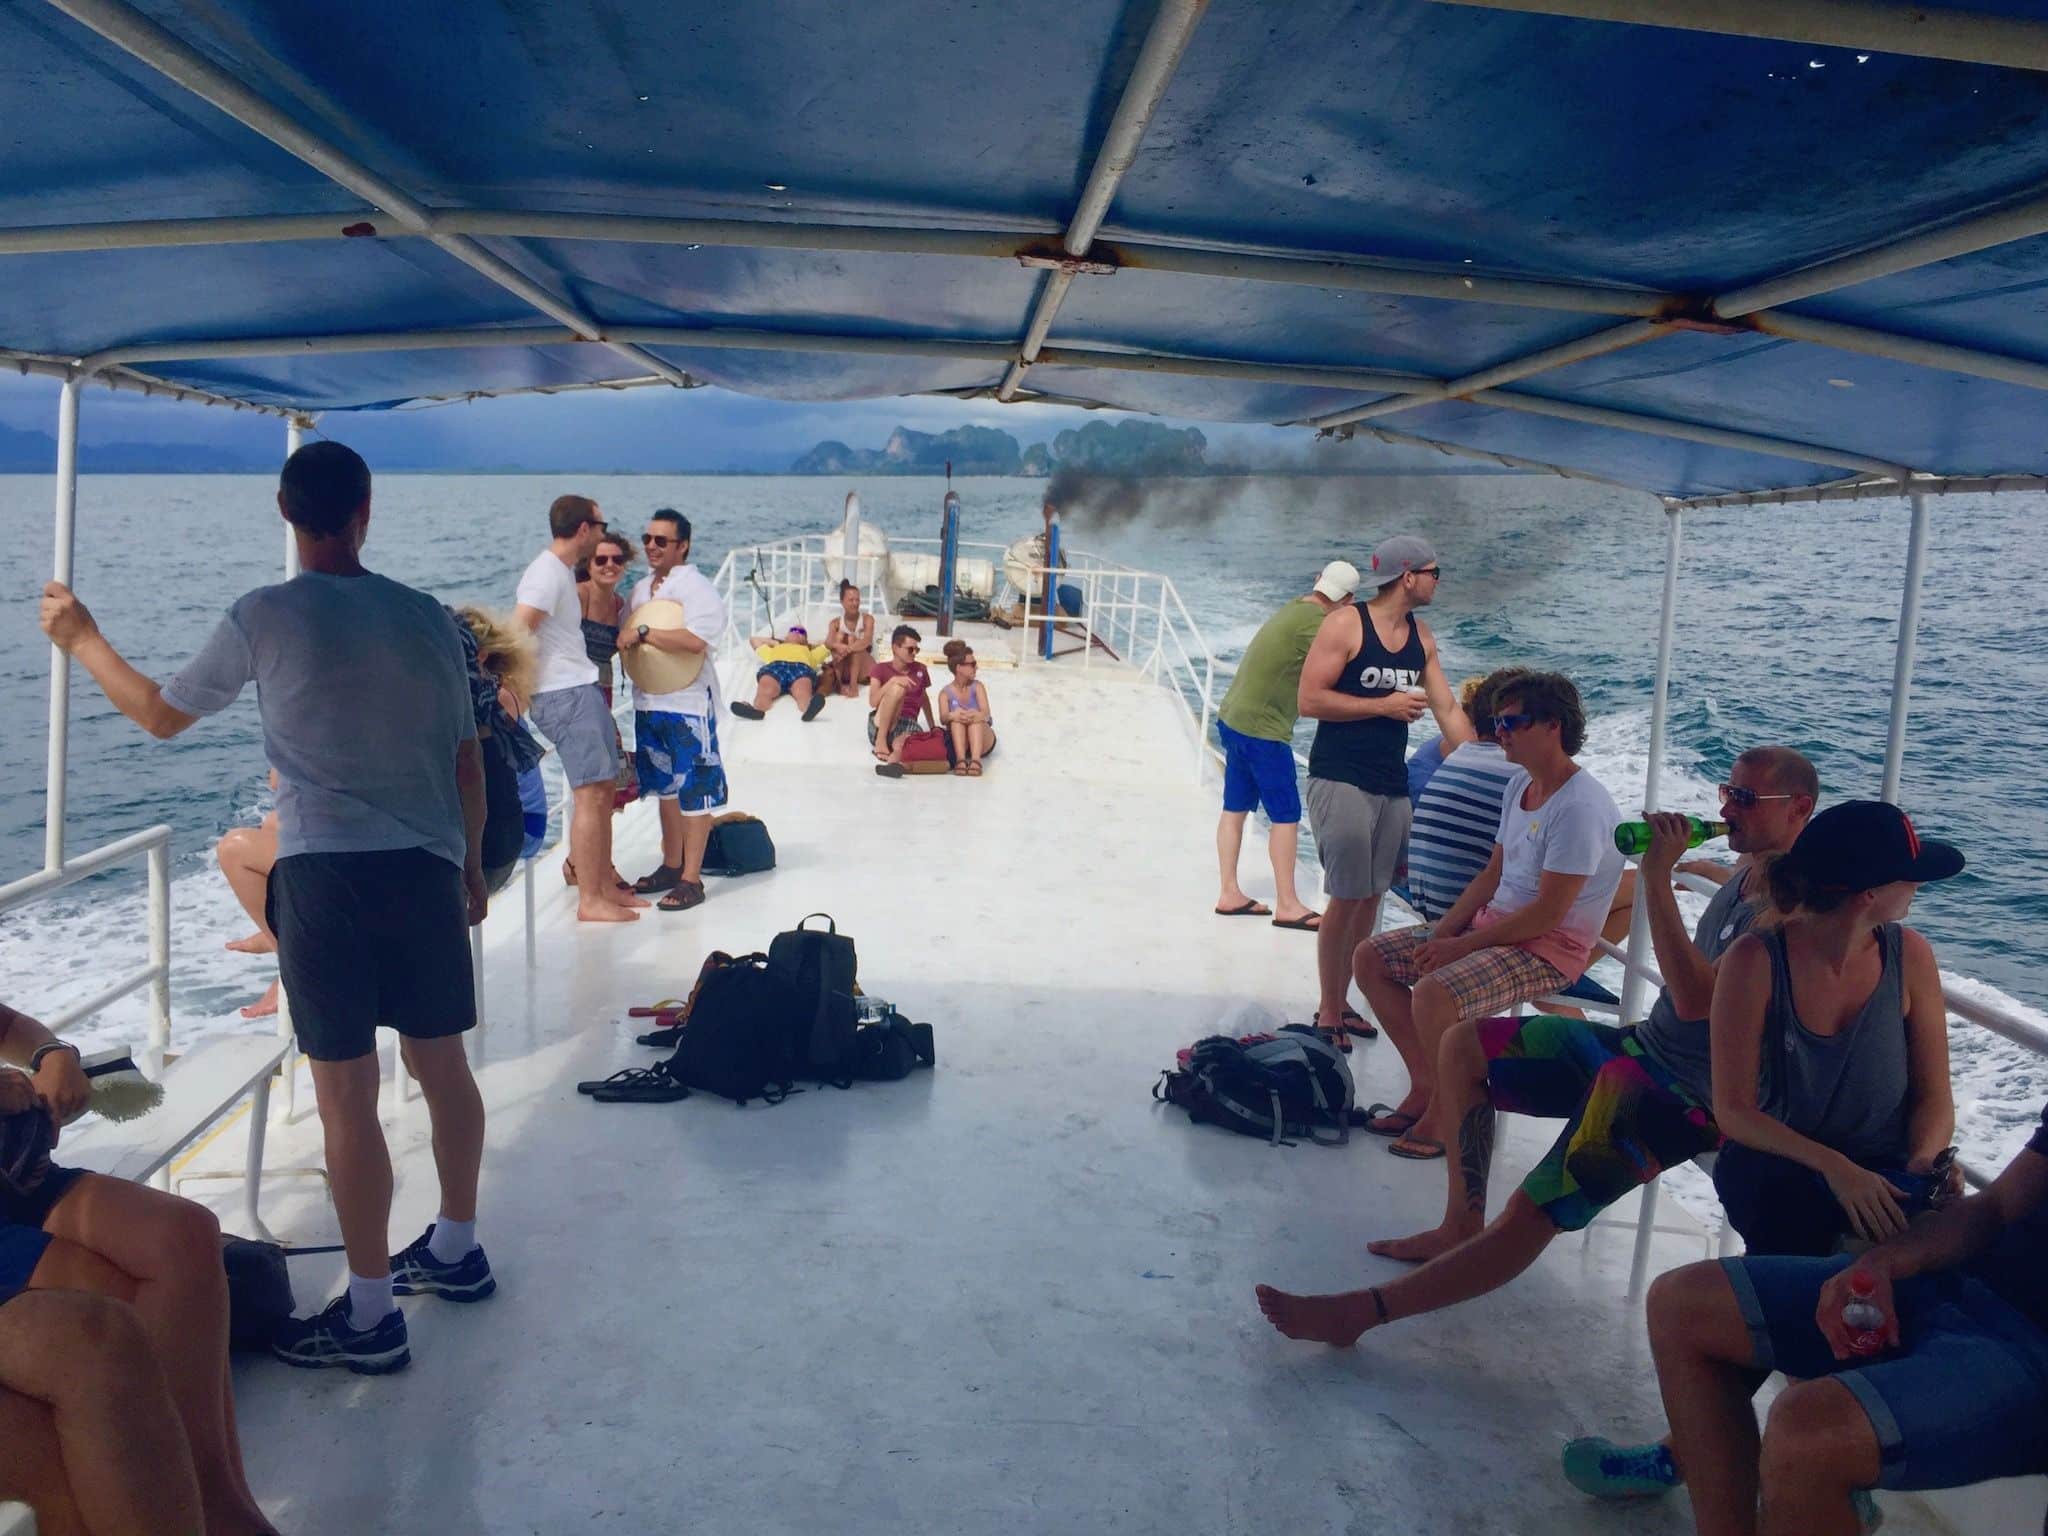 Getting to Koh Lipe: The trip on the conventional ferry turned into a 12-hour horror trip. Better to fly or take a speedboat. Photo: Sascha Tegtmeyer